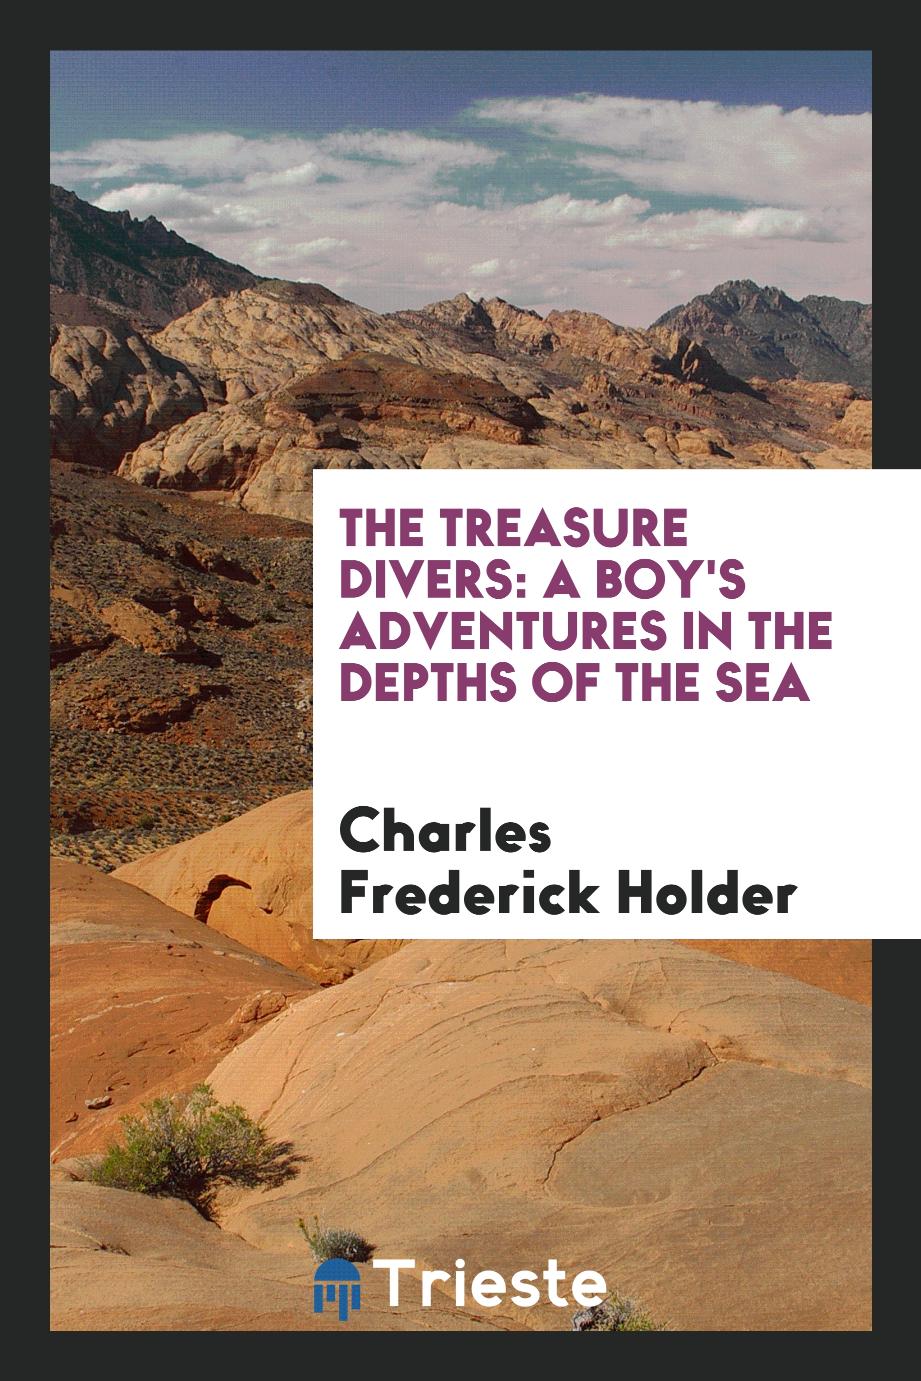 The Treasure Divers: A Boy's Adventures in the Depths of the Sea